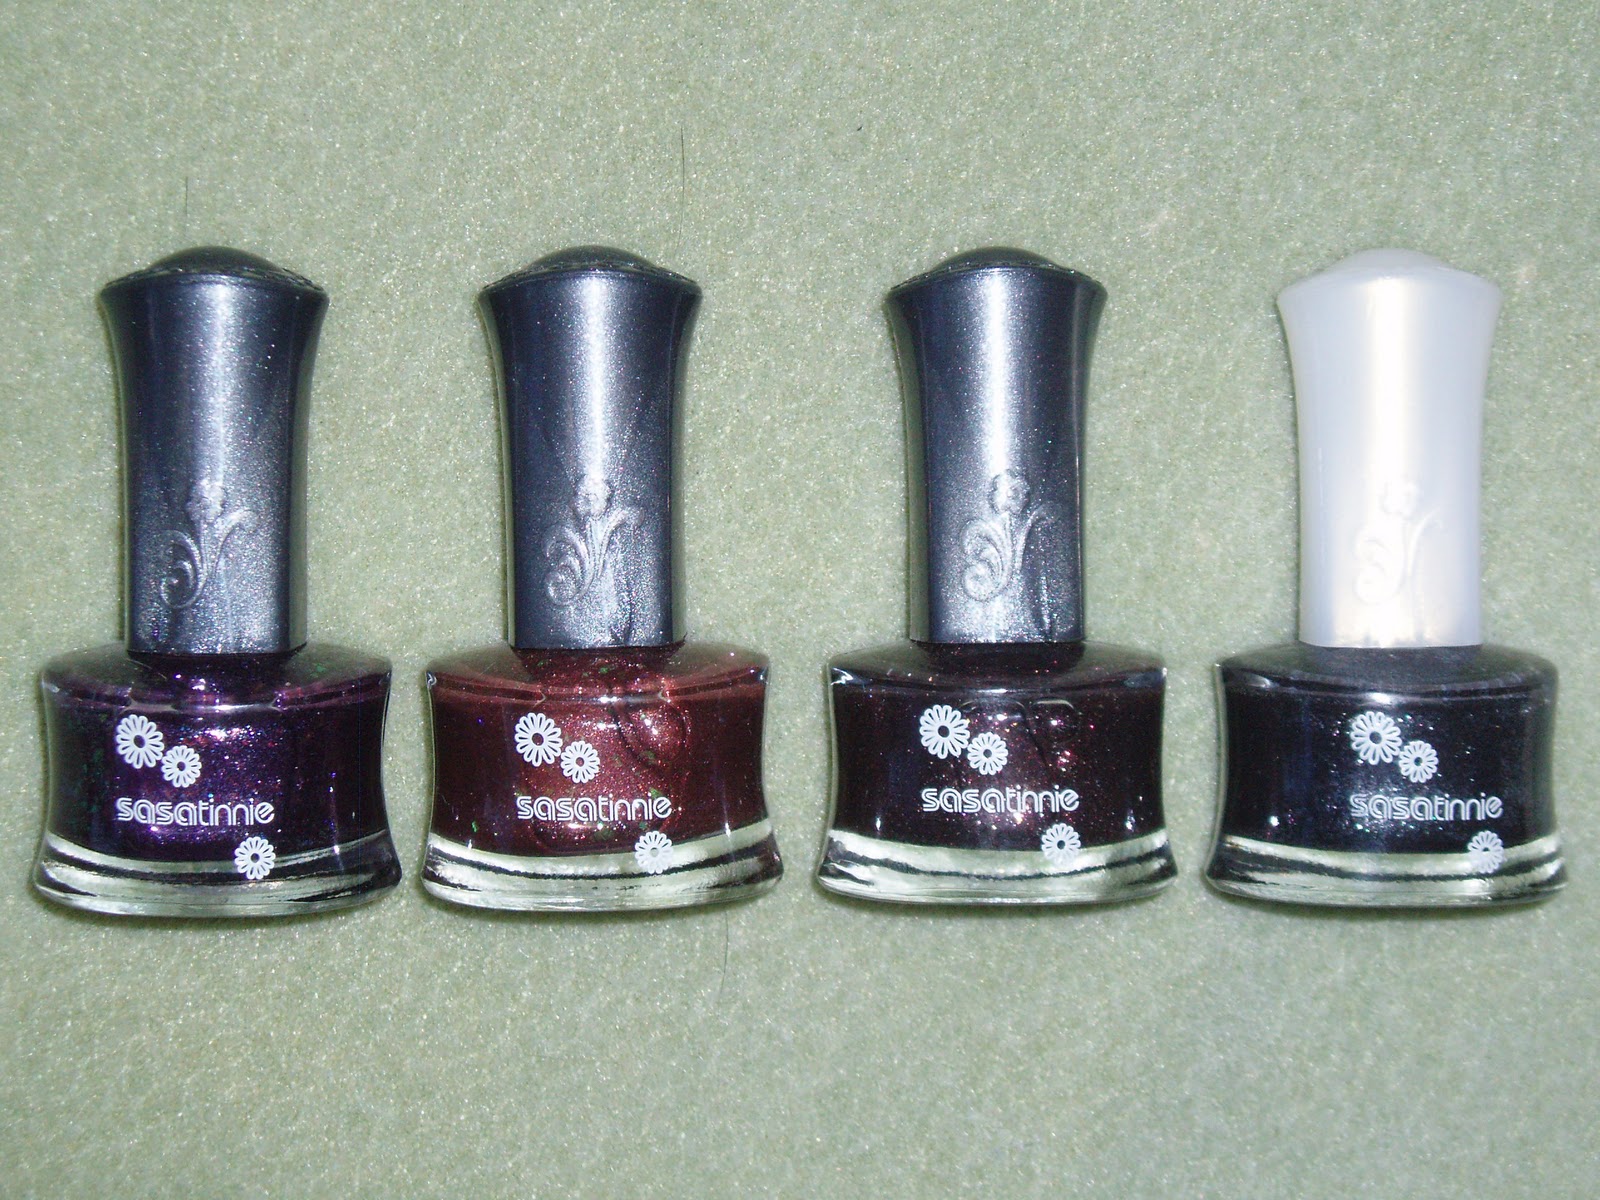 2. "Must-Try Asian Nail Polish Shades for a Pop of Color" - wide 7